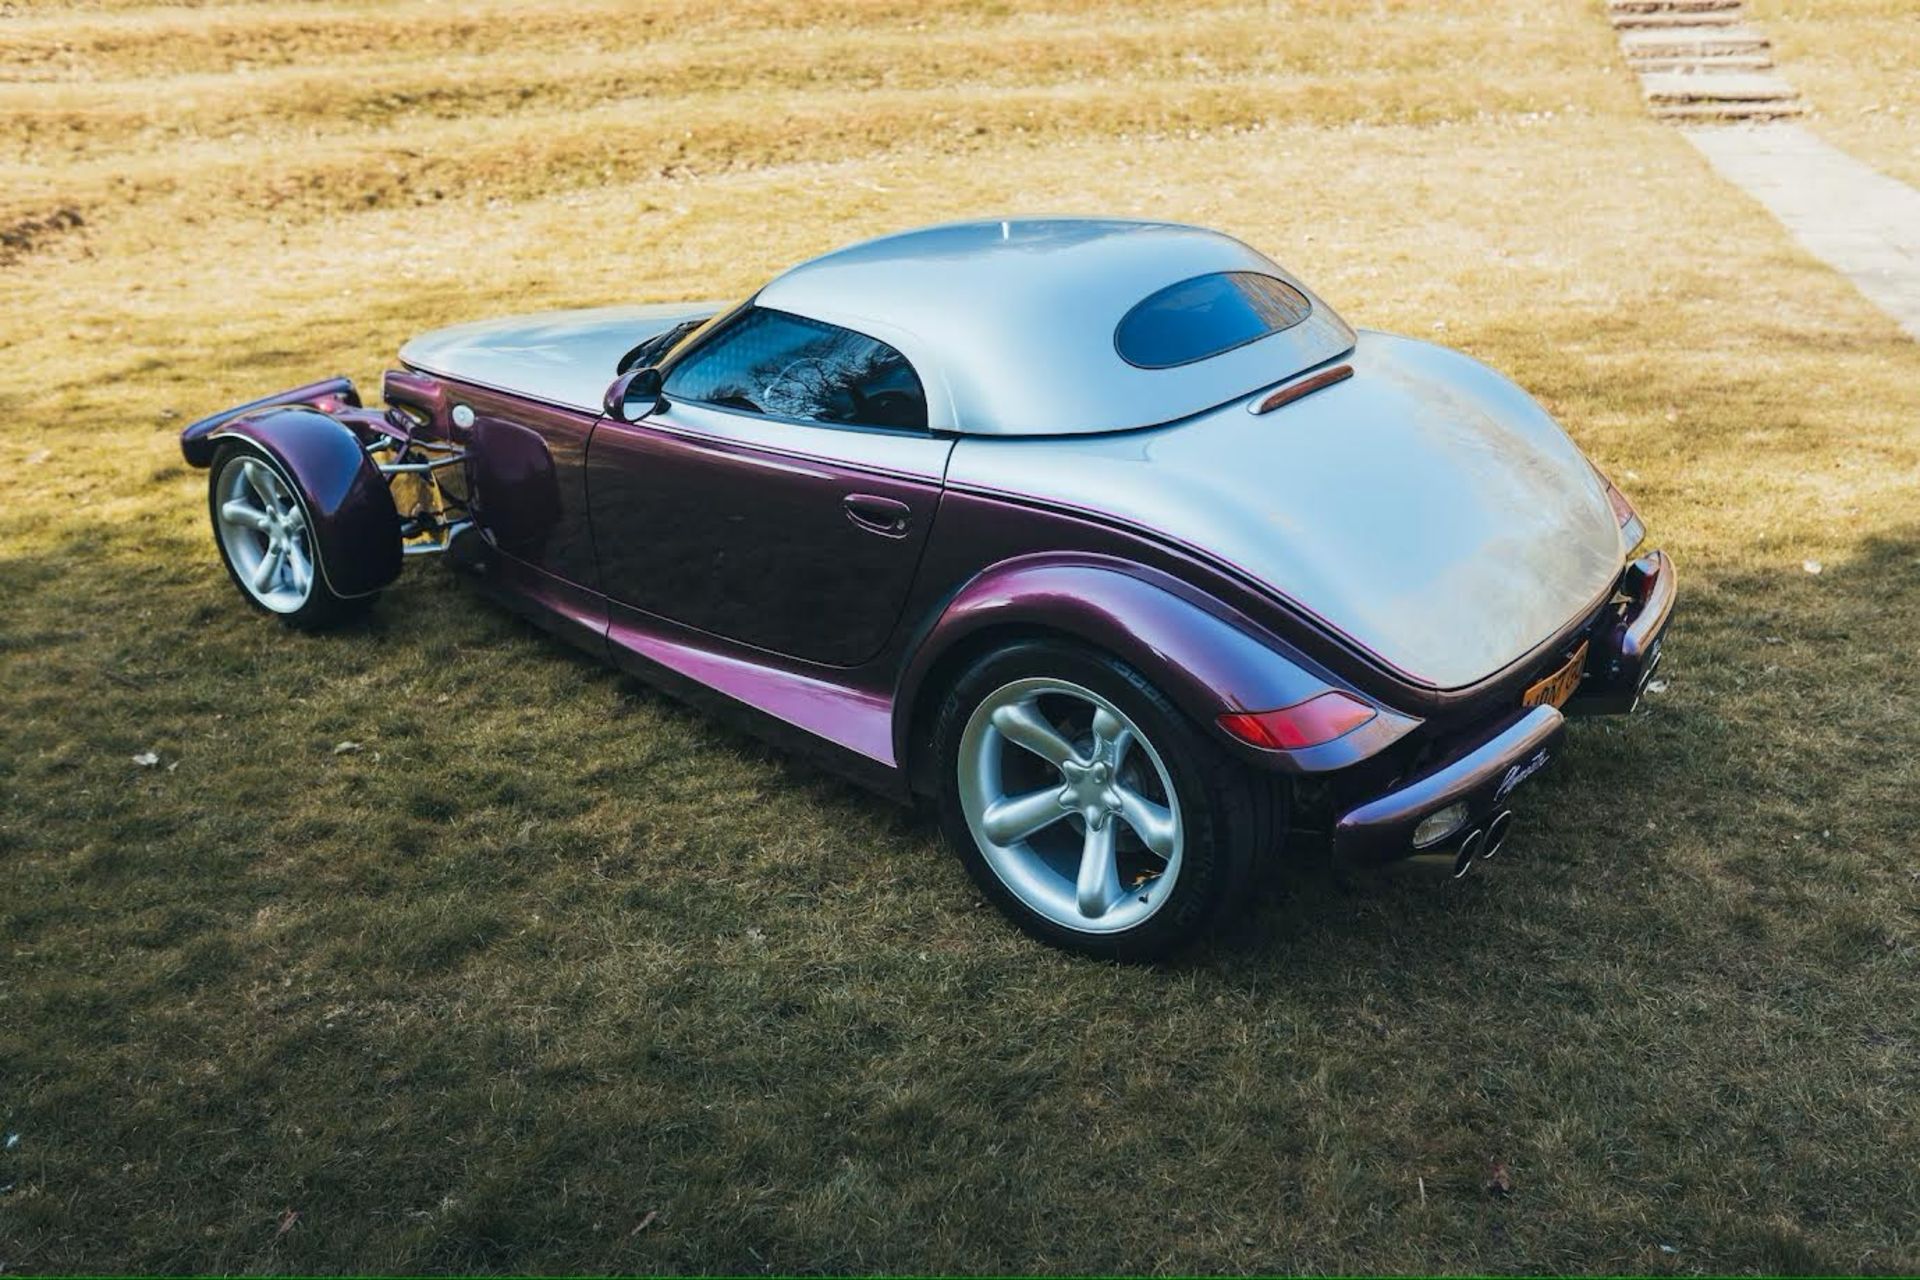 1998 CHRYSLER PLYMOUTH PROWLER V6 2 DOOR CONVERTIBLE, 3500cc PETROL ENGINE, AUTO *NO VAT* - Image 3 of 32